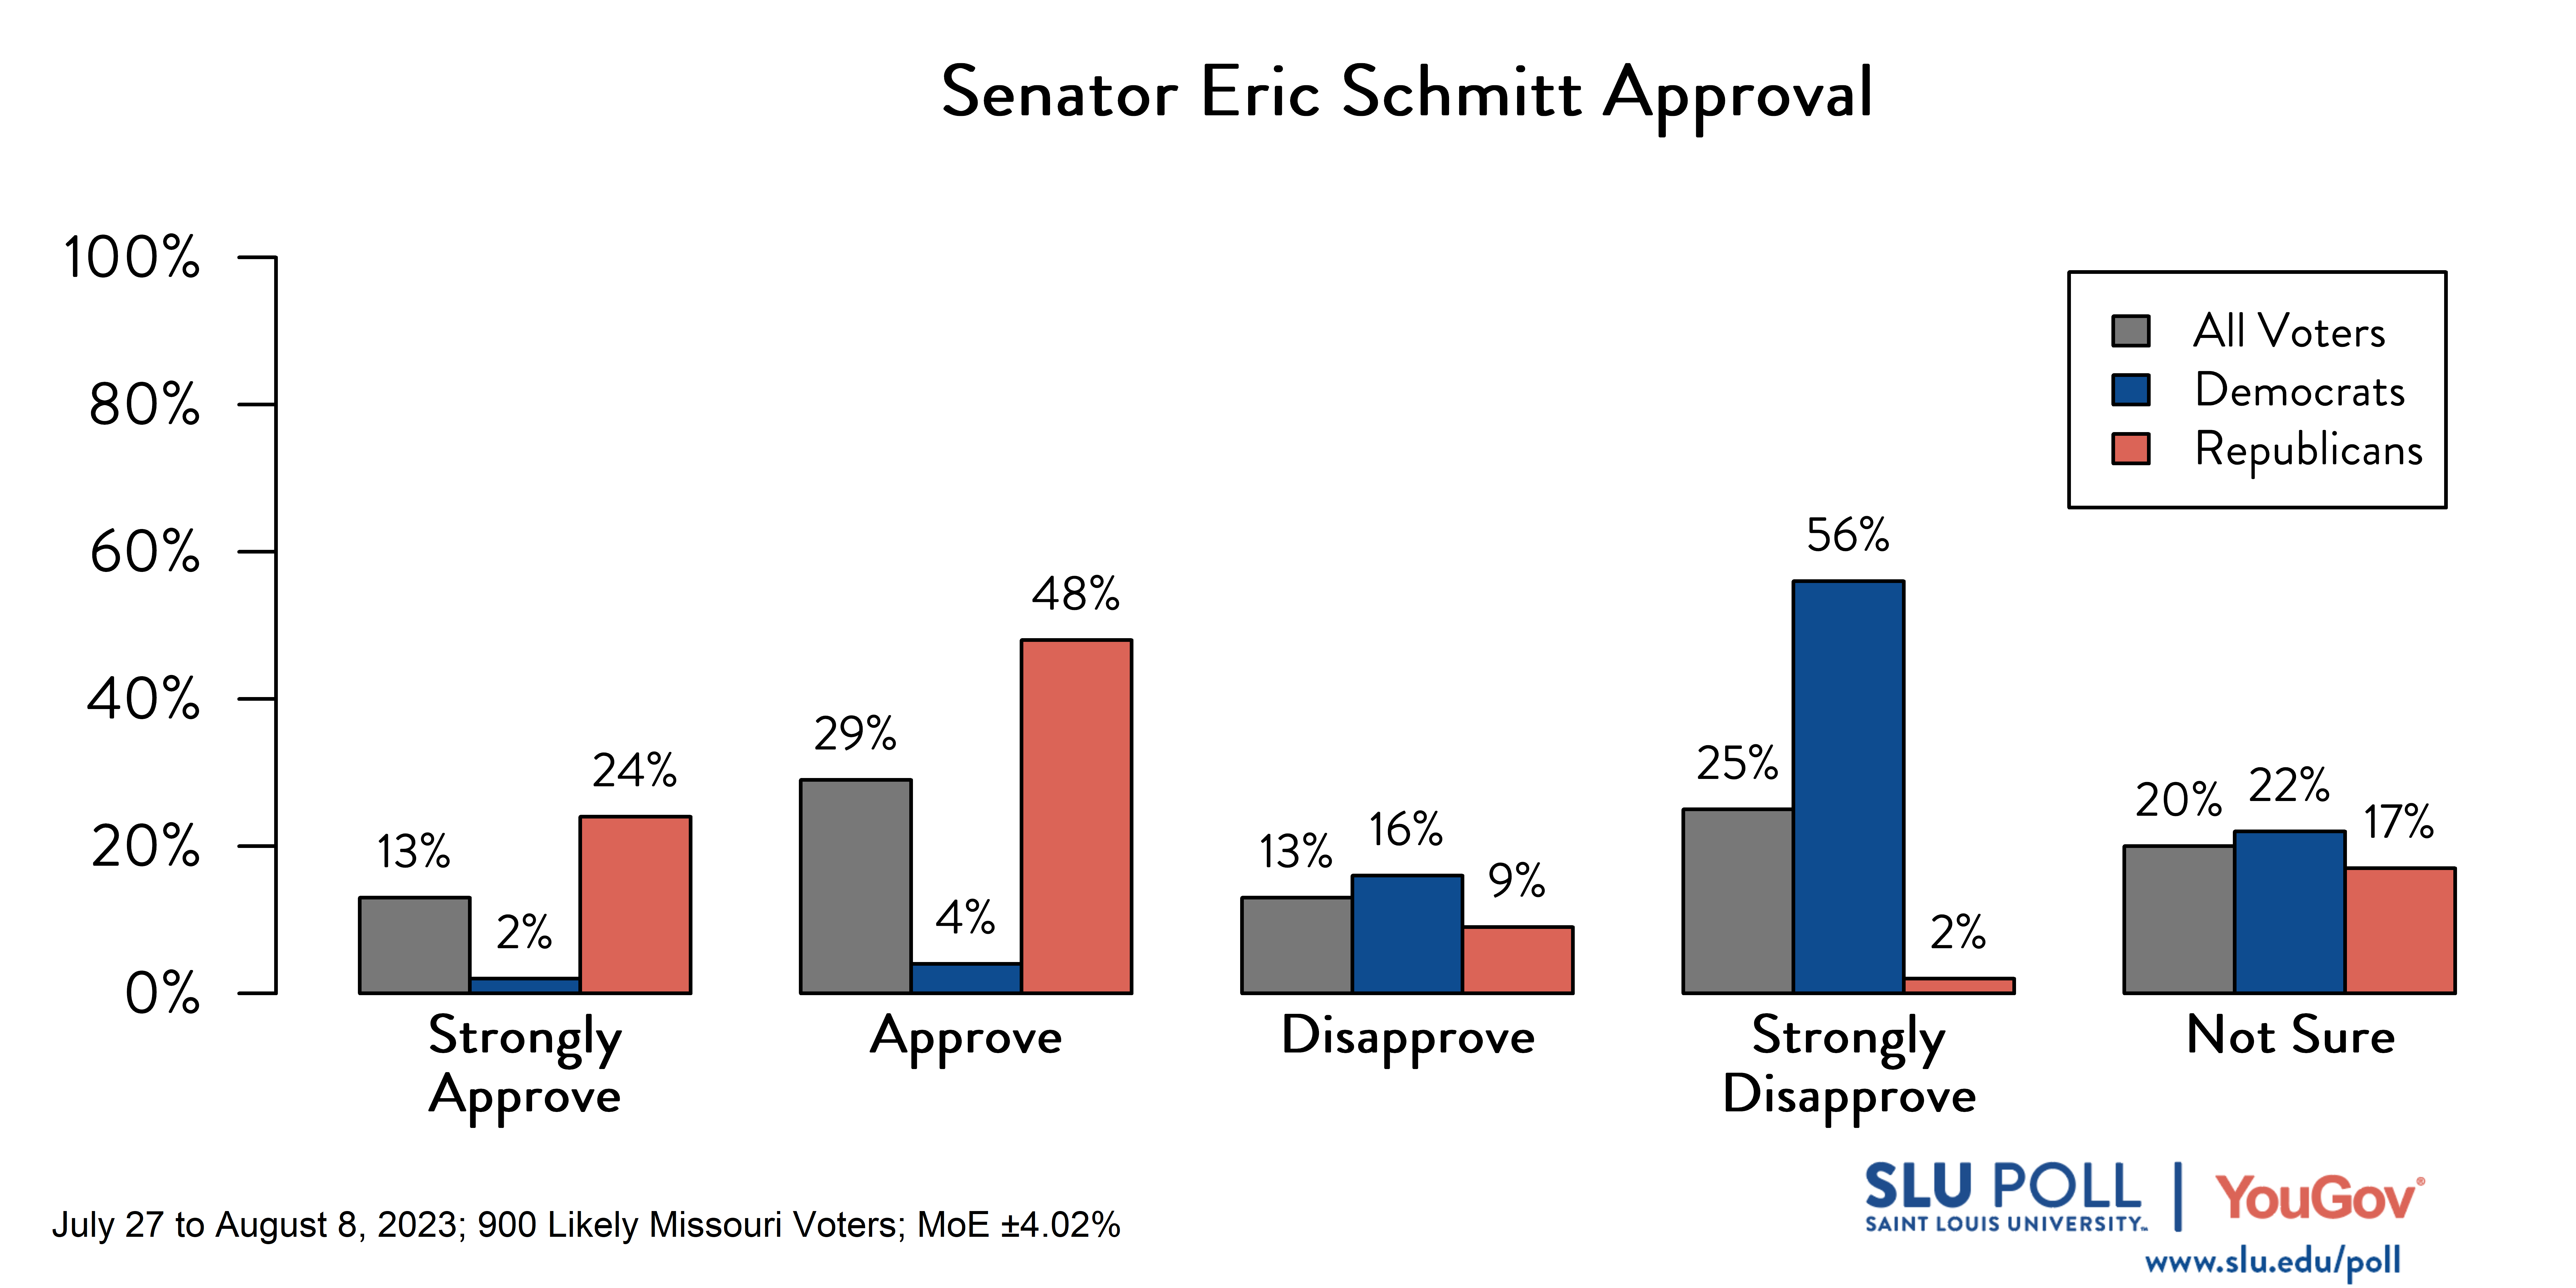 Likely voters' responses to 'Do you approve or disapprove of the way each is doing their job: Senator Eric Schmitt?': 13% Strongly approve, 29% Approve, 13% Disapprove, 25% Strongly disapprove, and 20% Not sure. Democratic voters' responses: ' 2% Strongly approve, 4% Approve, 16% Disapprove, 56% Strongly disapprove, and 22% Not sure. Republican voters' responses: 24% Strongly approve, 48% Approve, 9% Disapprove, 2% Strongly disapprove, and 17% Not sure.